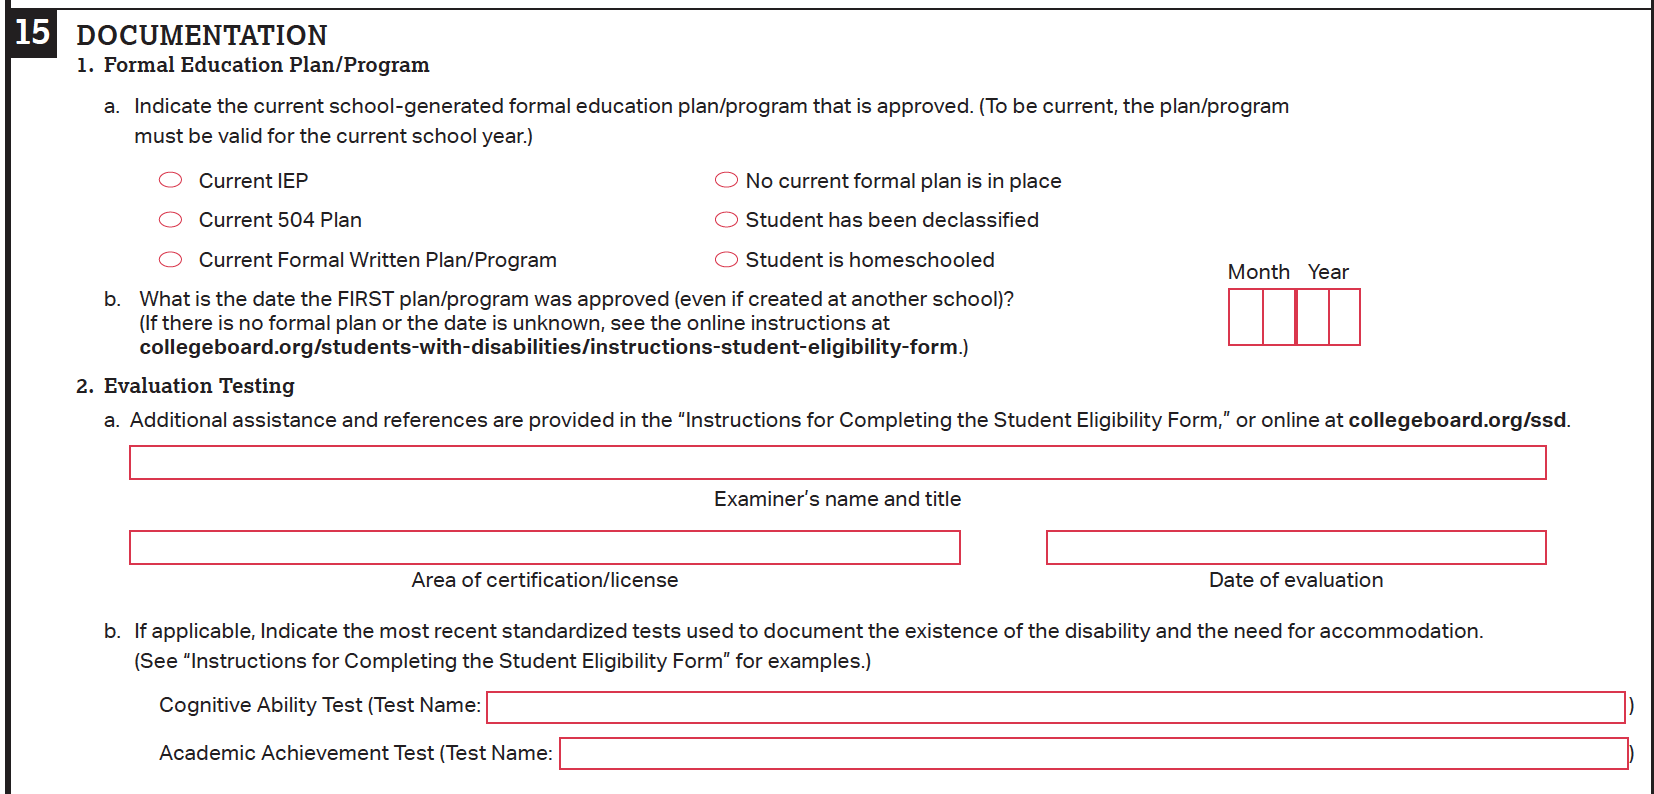 A screenshot of section 15, listing documentation of the disability, on the paper Student Eligibility Form